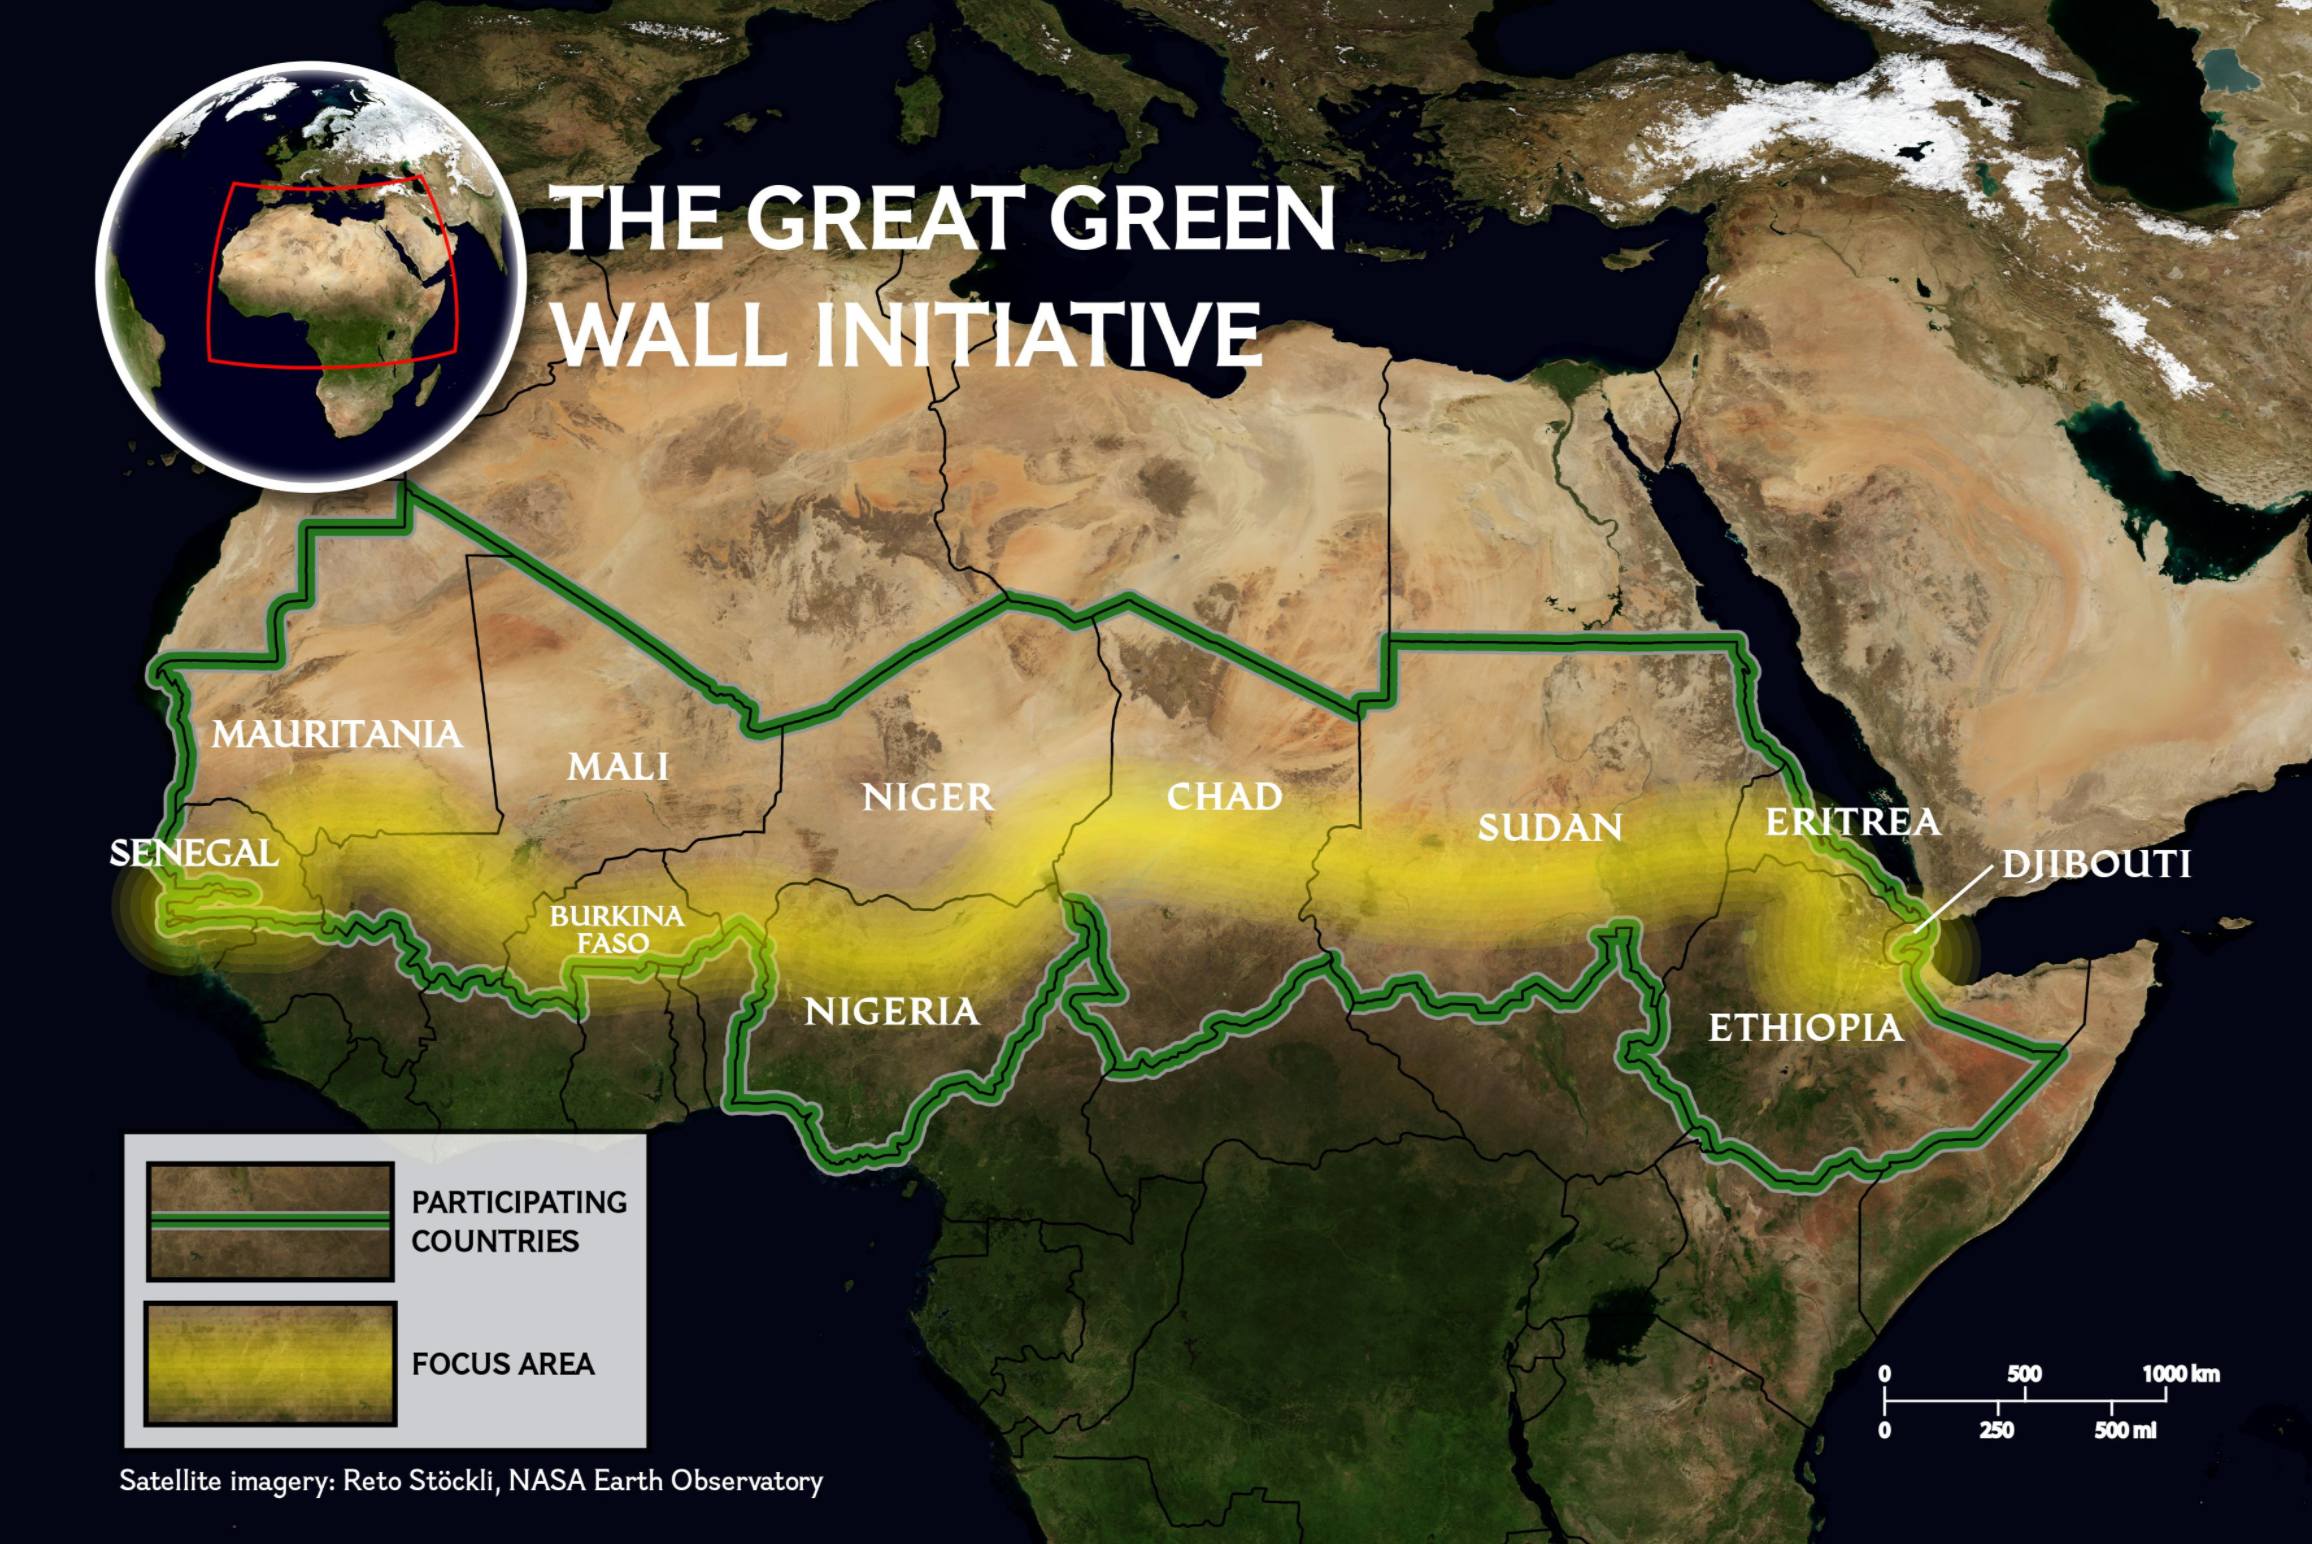 Africa’s ambitious project to re-green the Sahel region